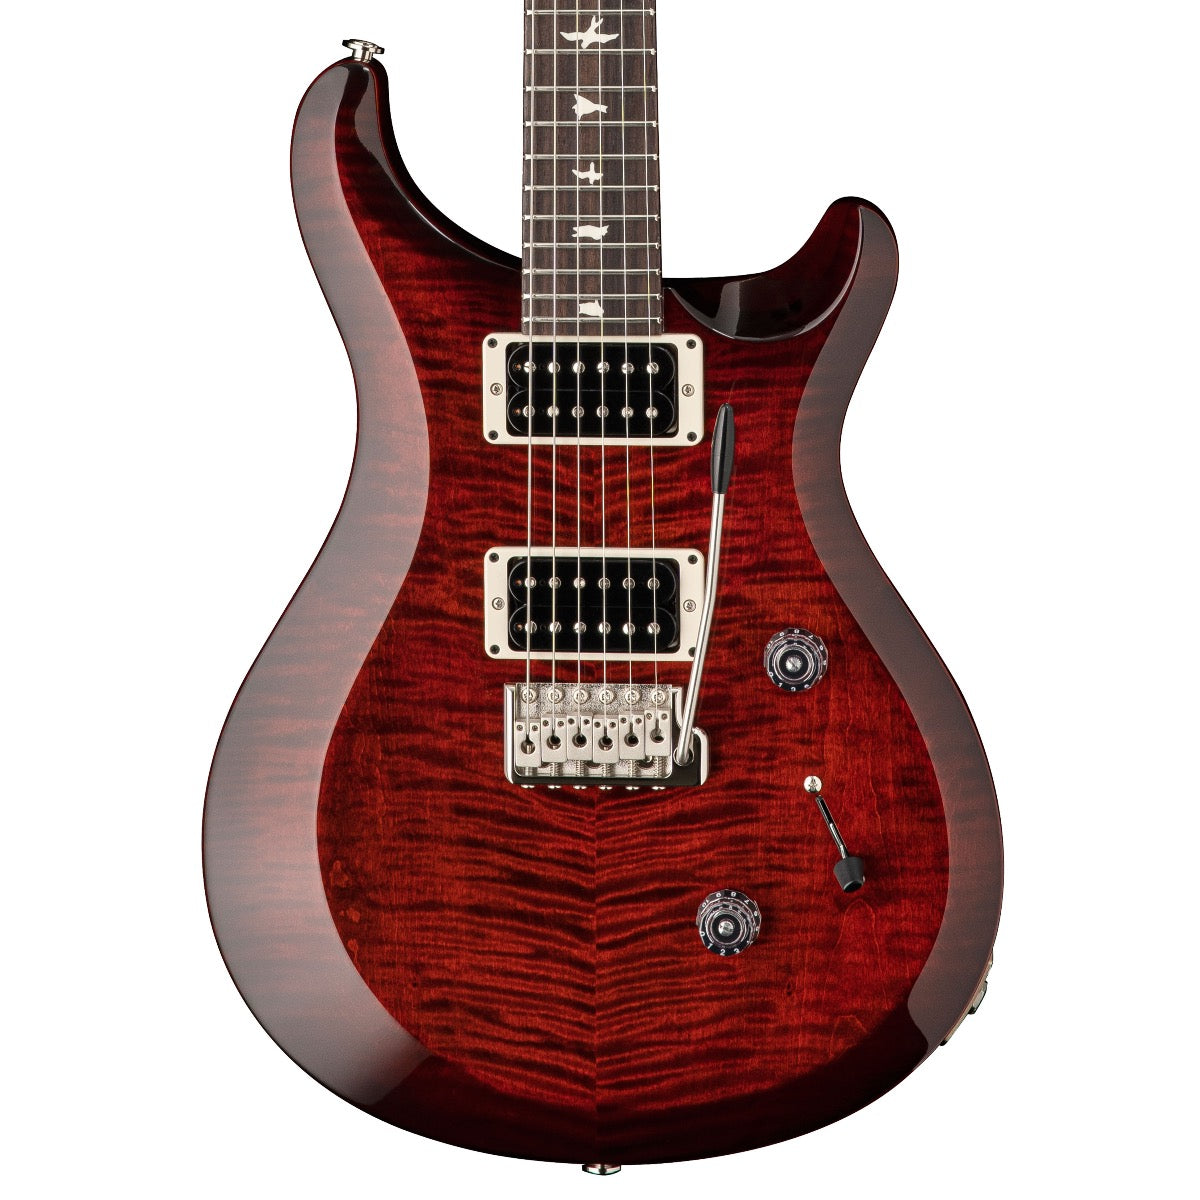 Close-up top view of PRS S2 Custom 24 Electric Guitar - Fire Red Burst showing body and portion of fingerboard